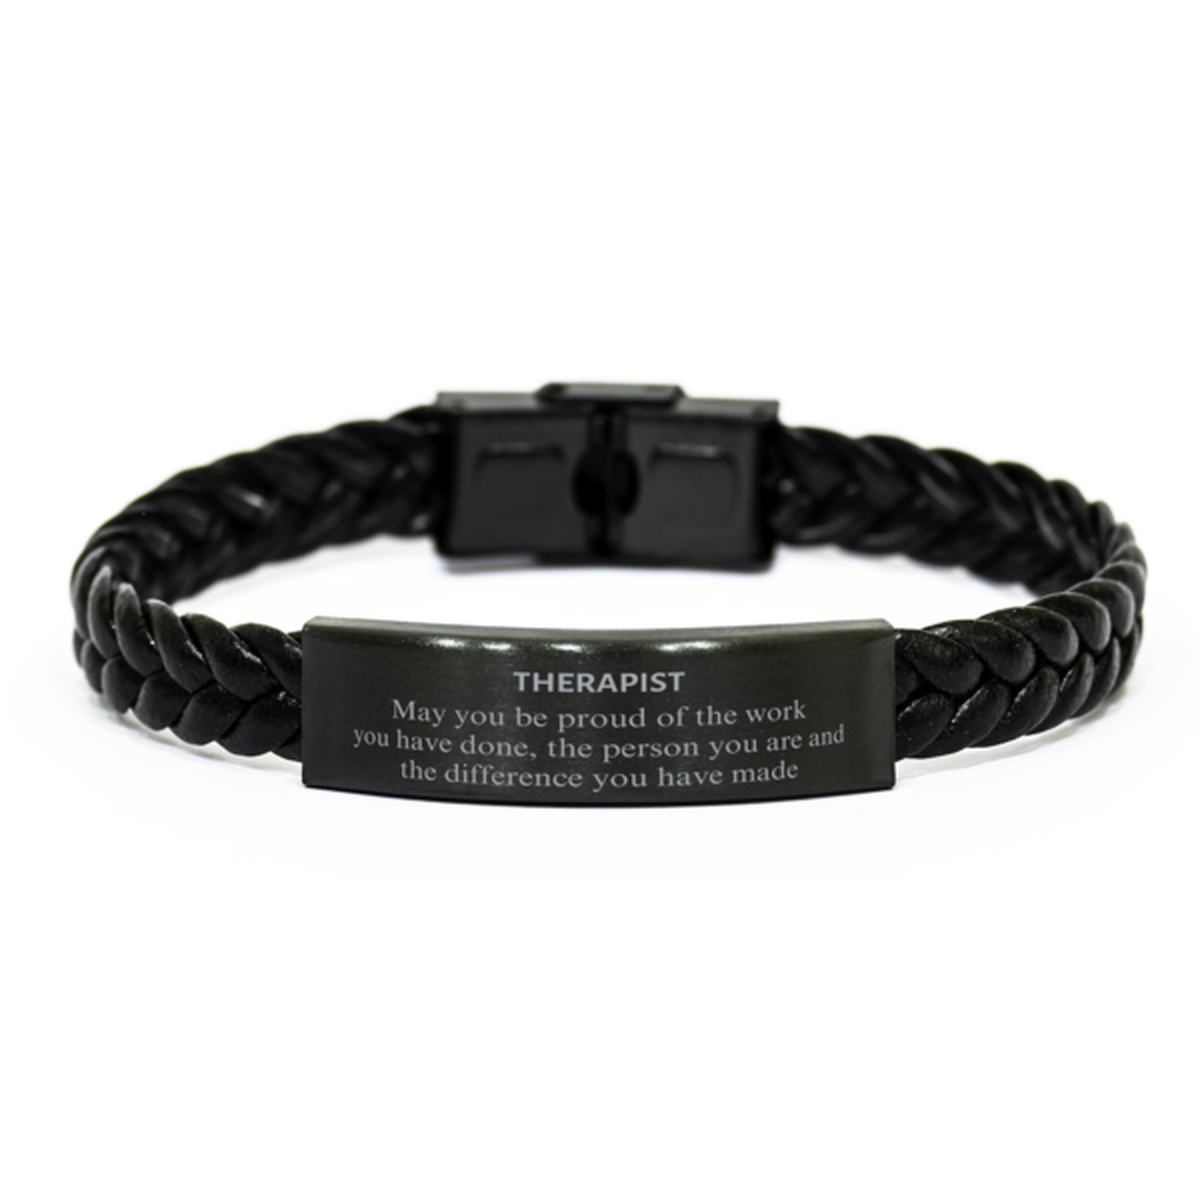 Therapist May you be proud of the work you have done, Retirement Therapist Braided Leather Bracelet for Colleague Appreciation Gifts Amazing for Therapist